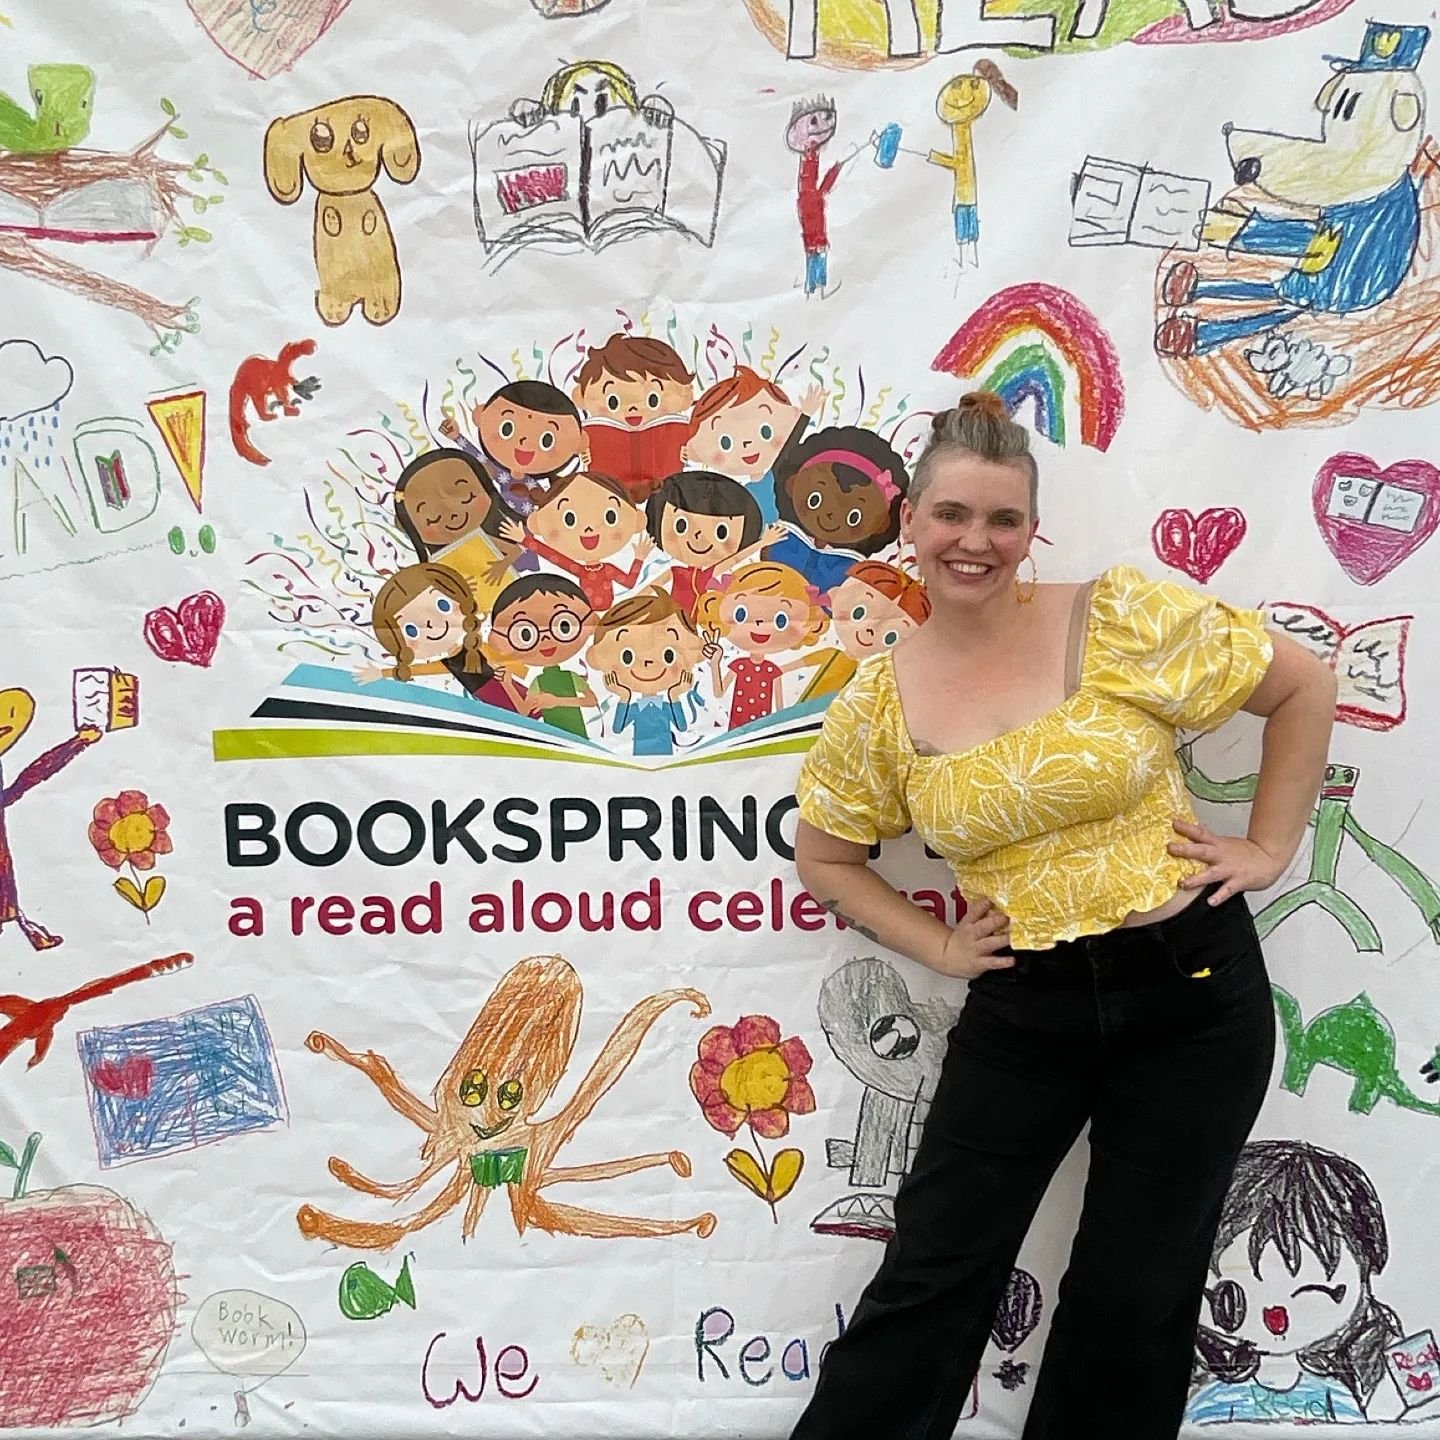 Thank you so much to @bookspringatx for having our founder, Chrysta, come and read at your book celebration! It is truly an incredible event for the Austin Community. Adults and children alike were having so much fun. We were delighted to be a part o